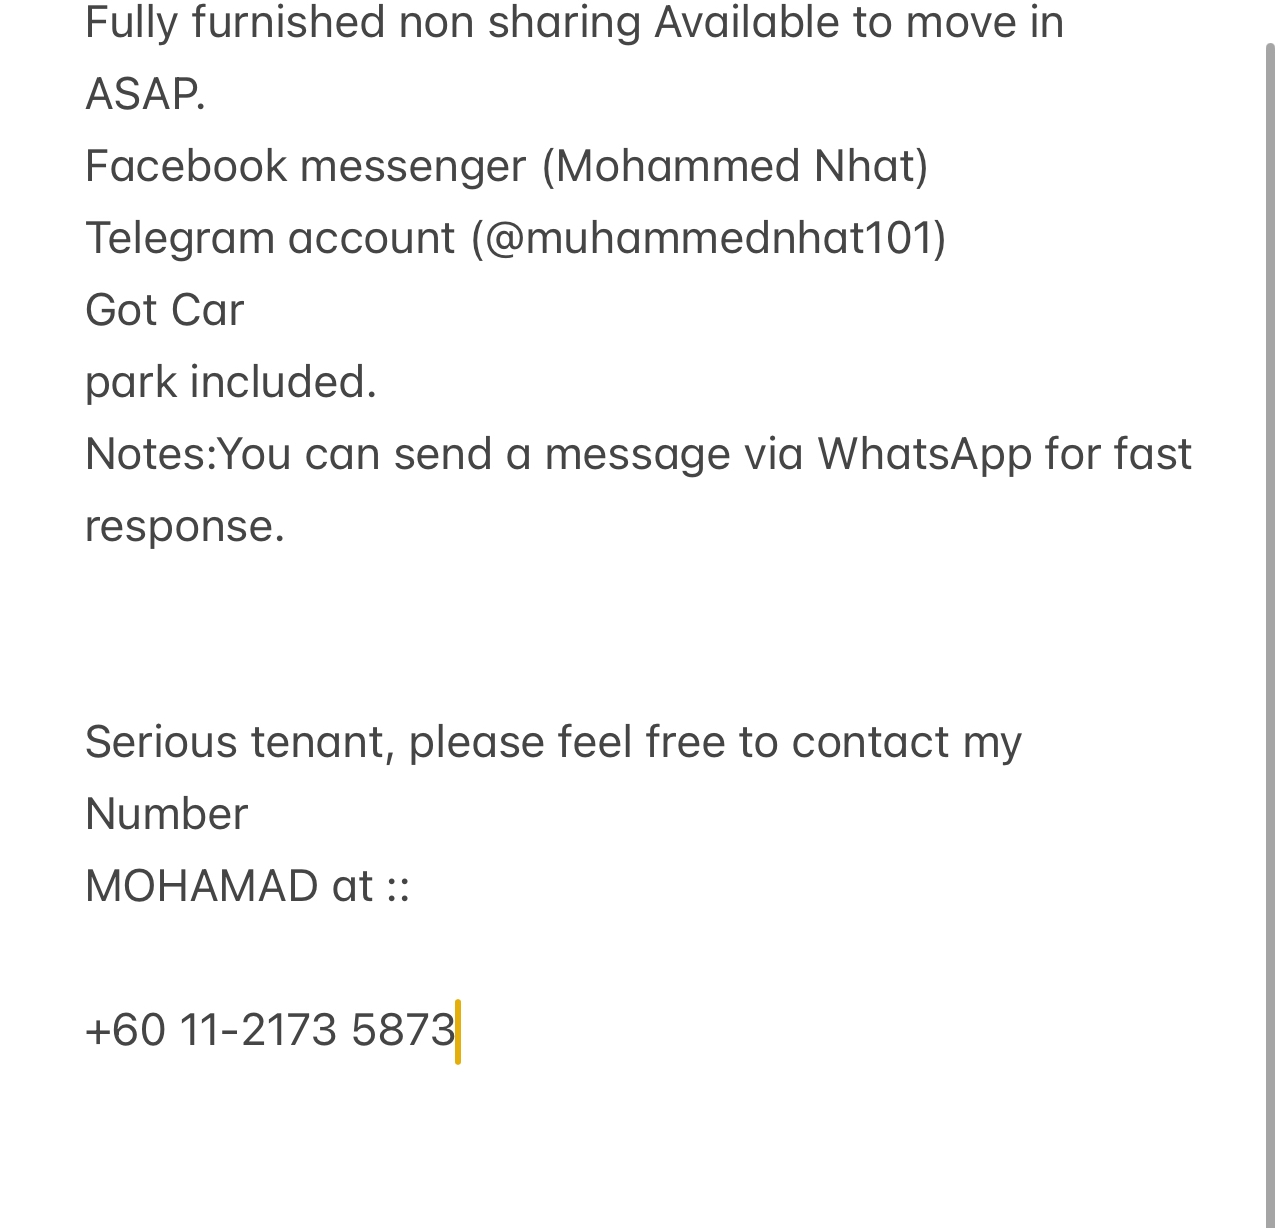 room for rent, studio, crescentia park, Send the owner a message on WhatsApp/facebook if you want to RENT the unit facebook (Mohammed Nhat)&Telegram(@muhammednhat101) Fully furnished non sharing :(comfortable)